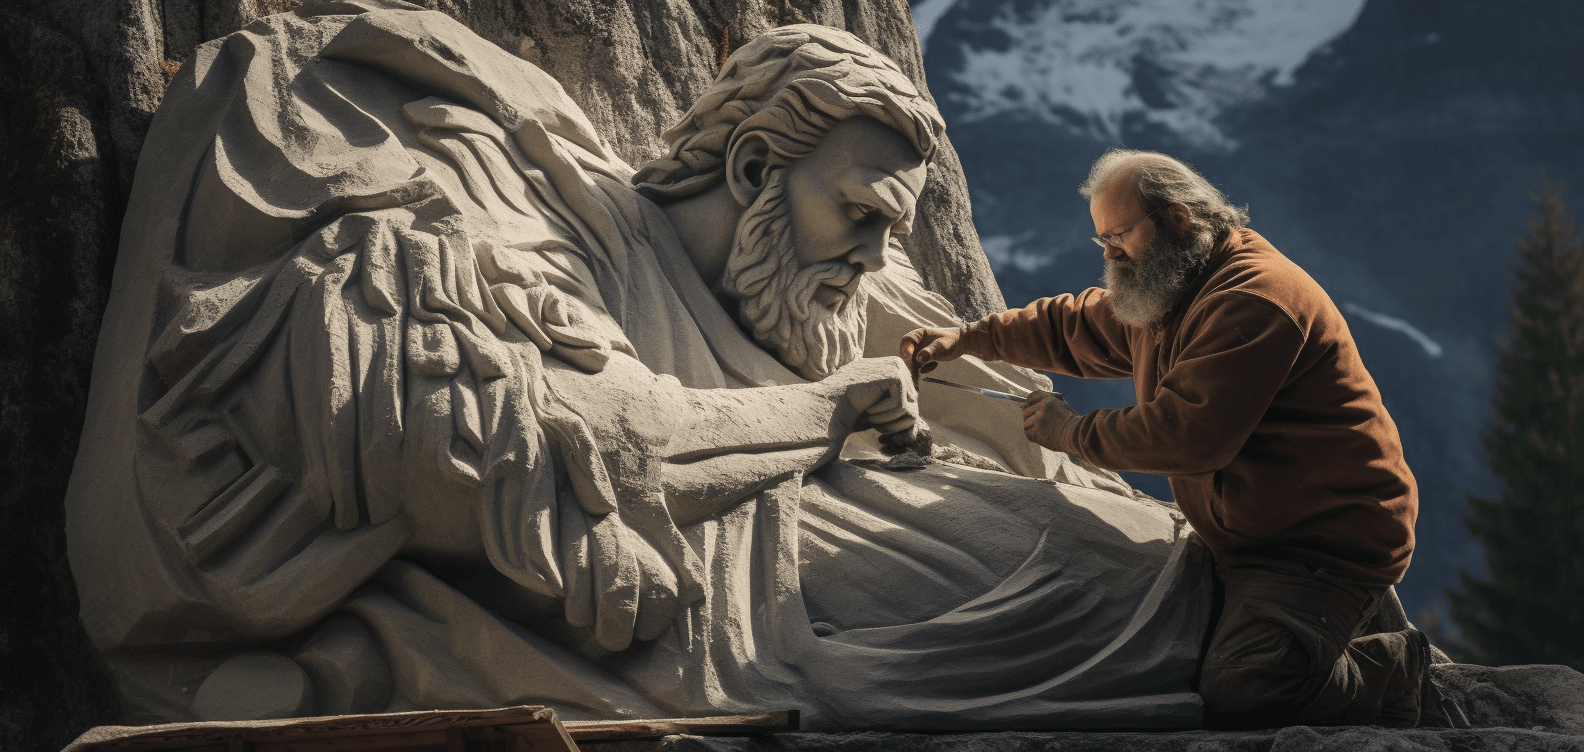 An artist carving a statue of a man out of a giant mountain by Ted Tschopp using Midjourney